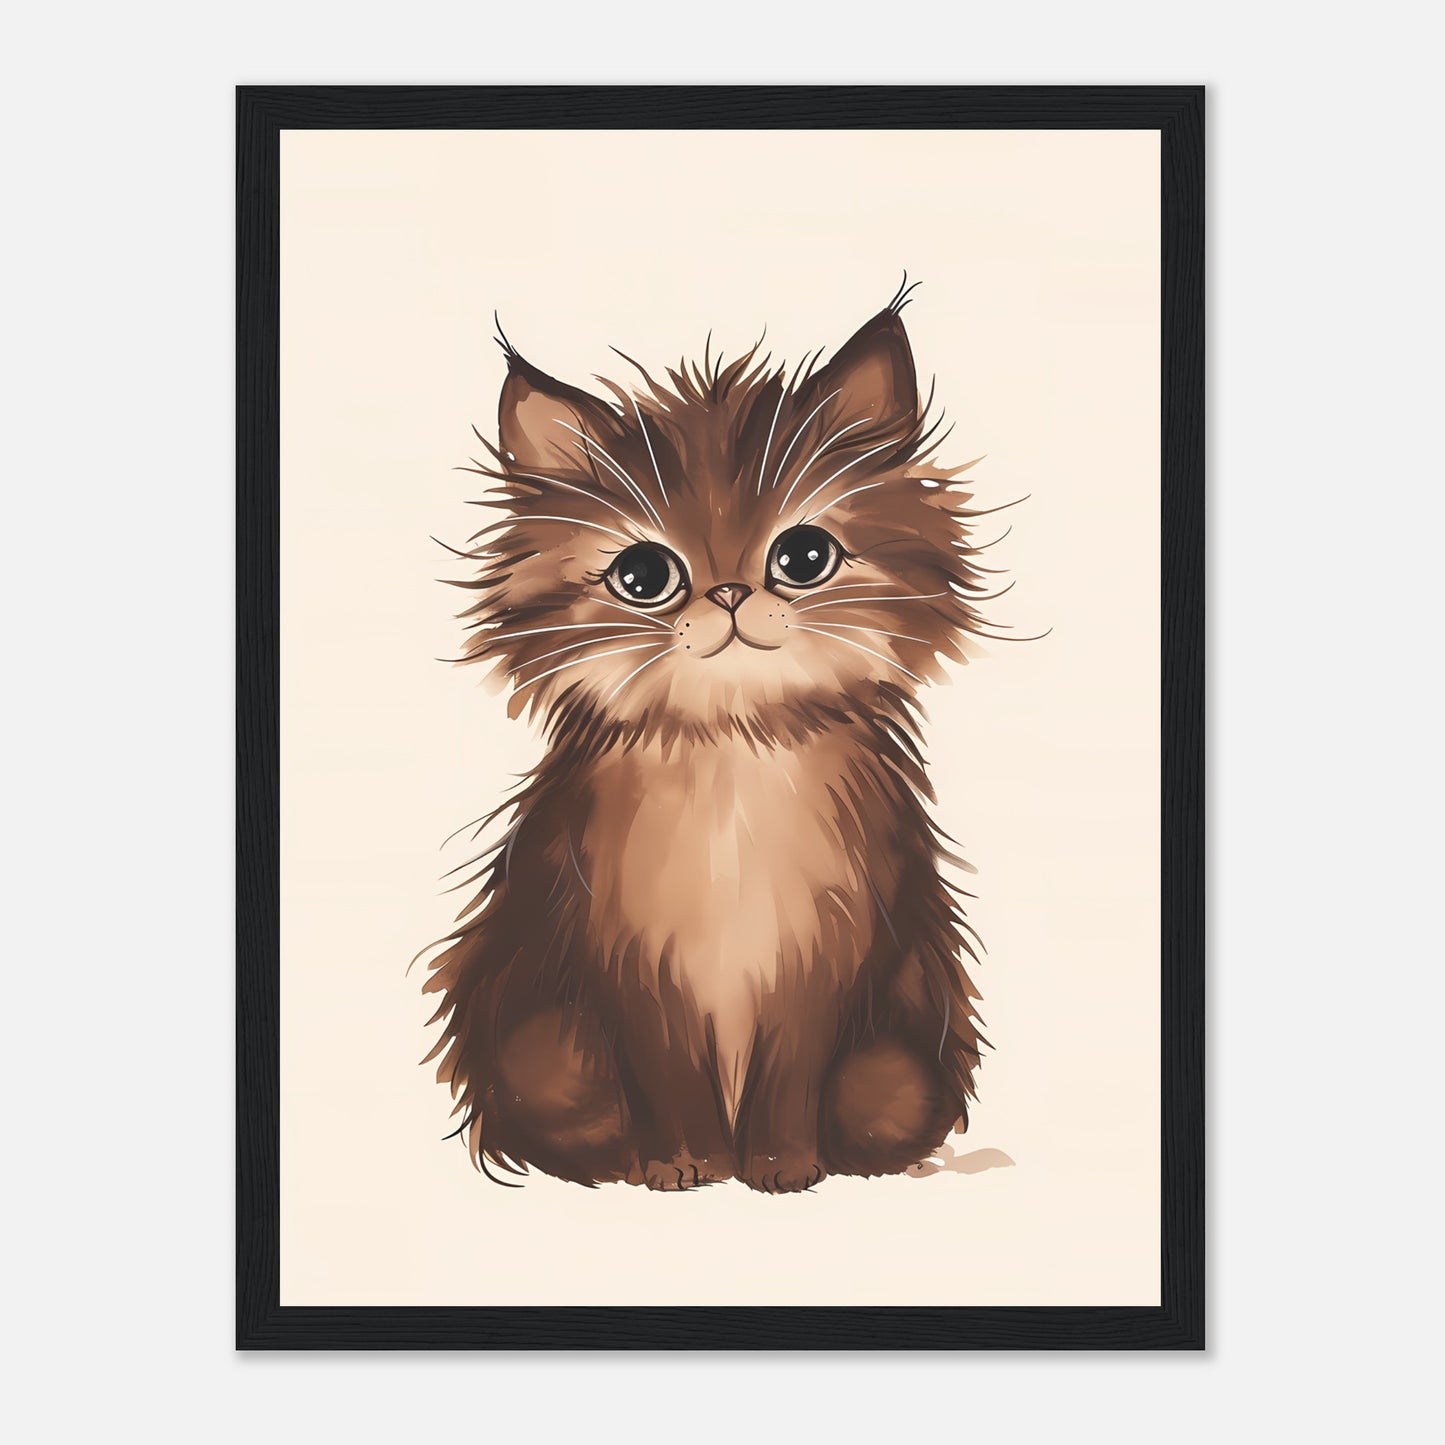 Illustration of an adorable fluffy brown kitten with big eyes, framed on a wall.